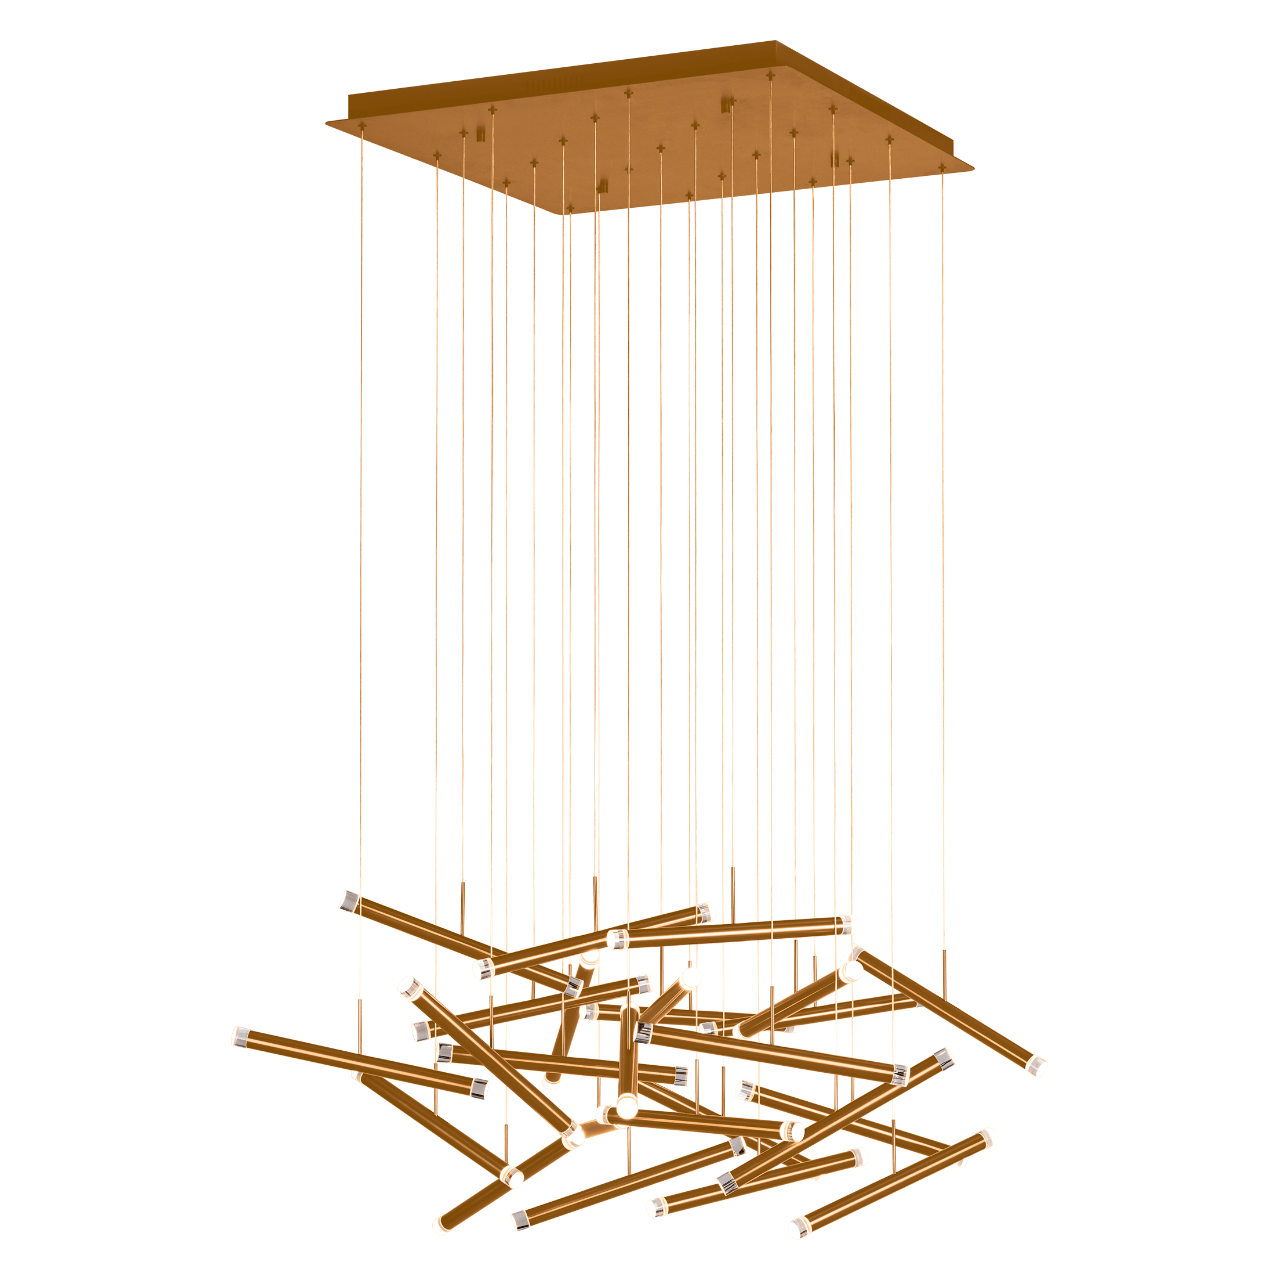 Pageone - Seesaw (25). Chandelier - Hbdepot